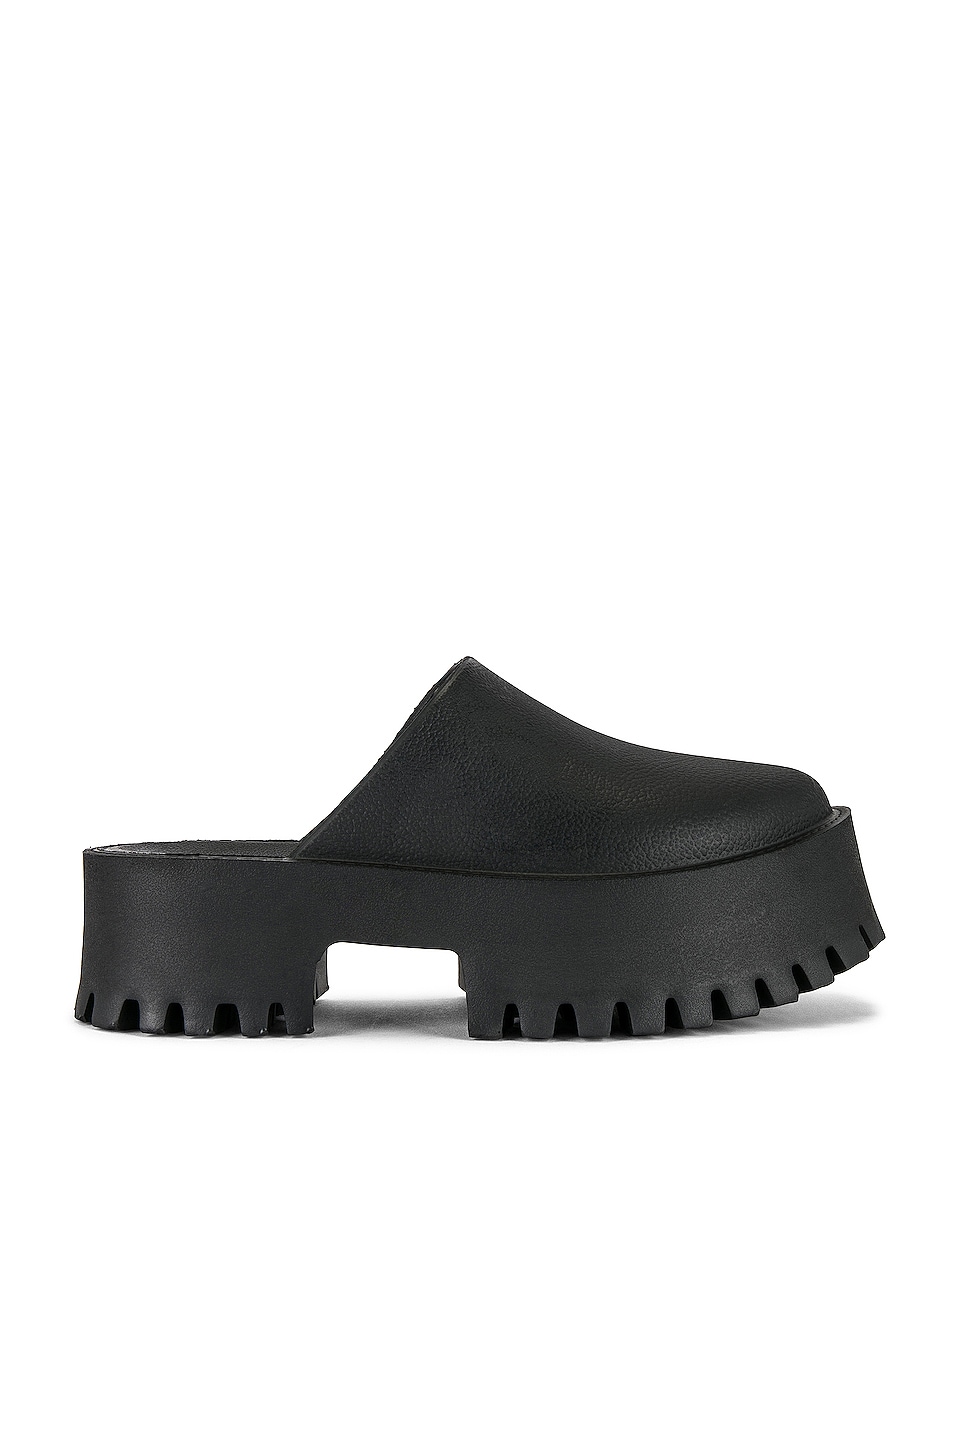 Jeffrey Campbell Clogge in Black | REVOLVE